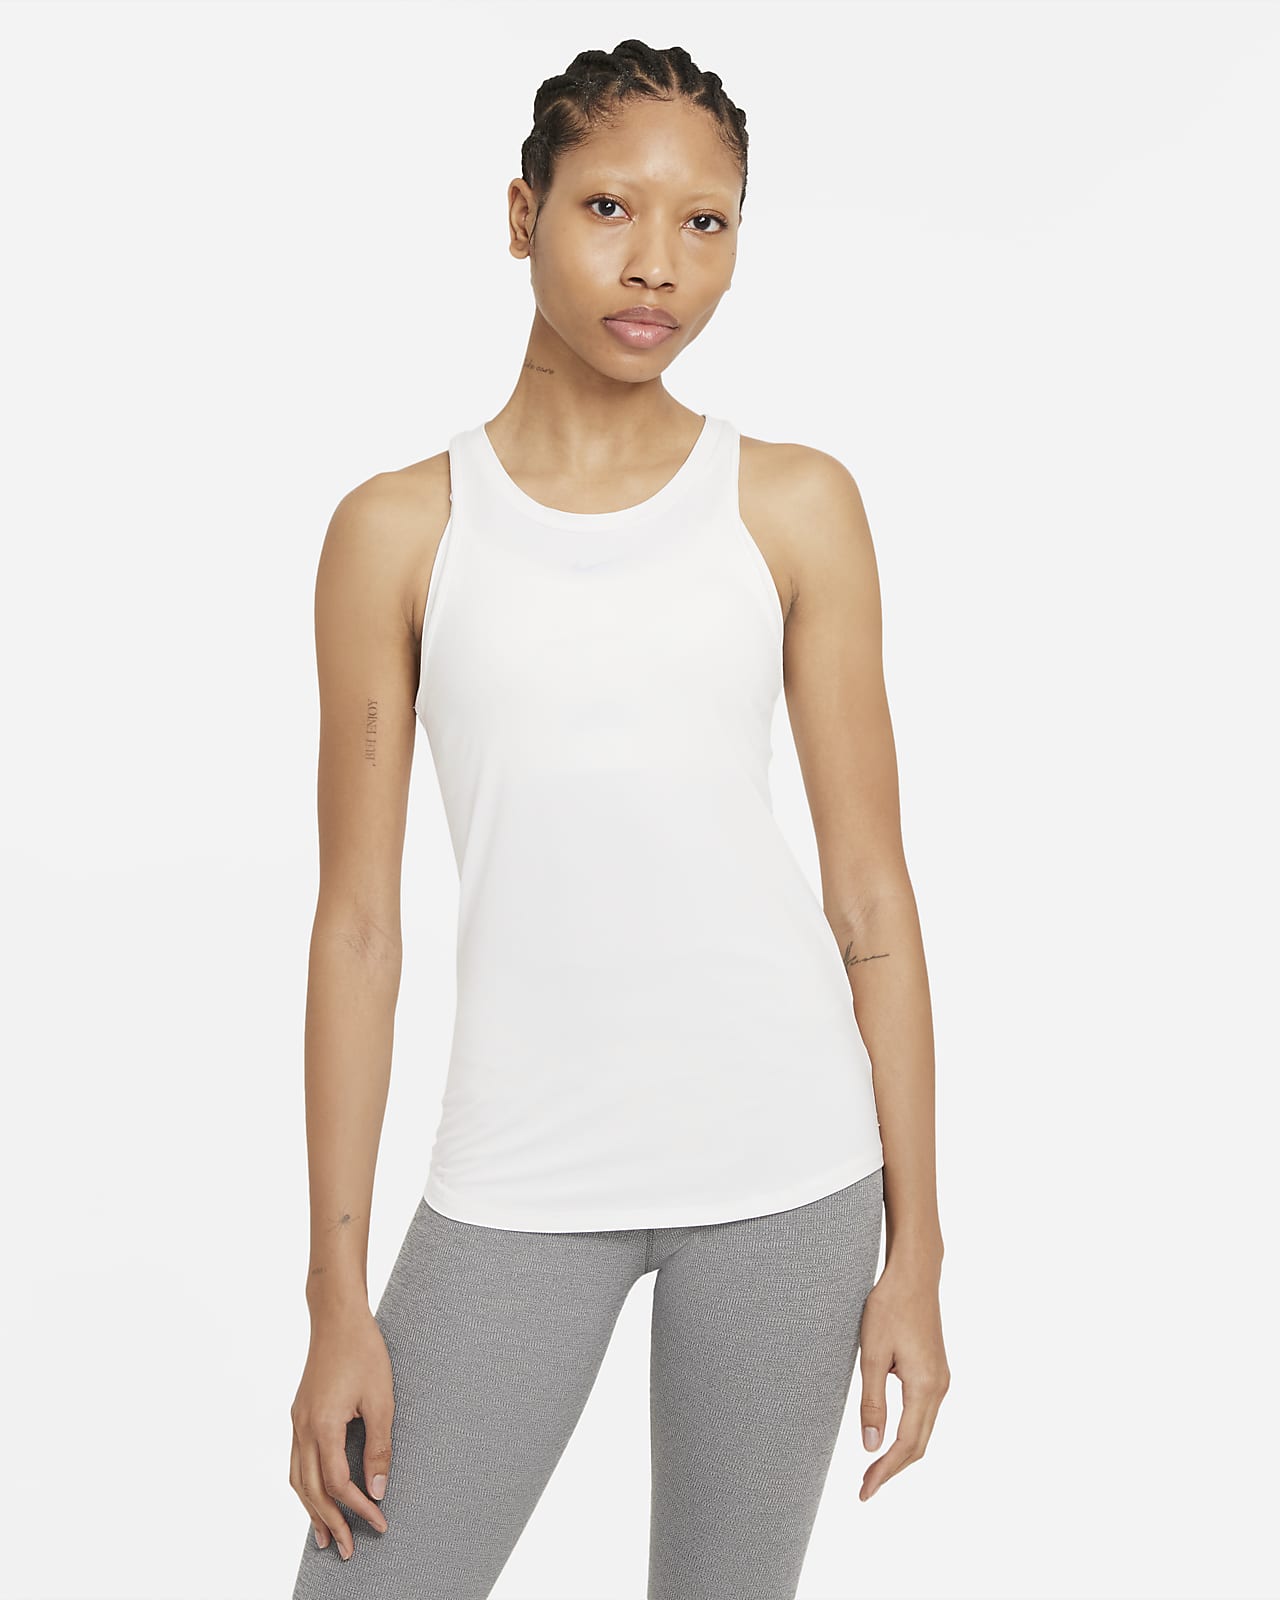 Breathable Sleeveless/Tank Tops. Nike IN